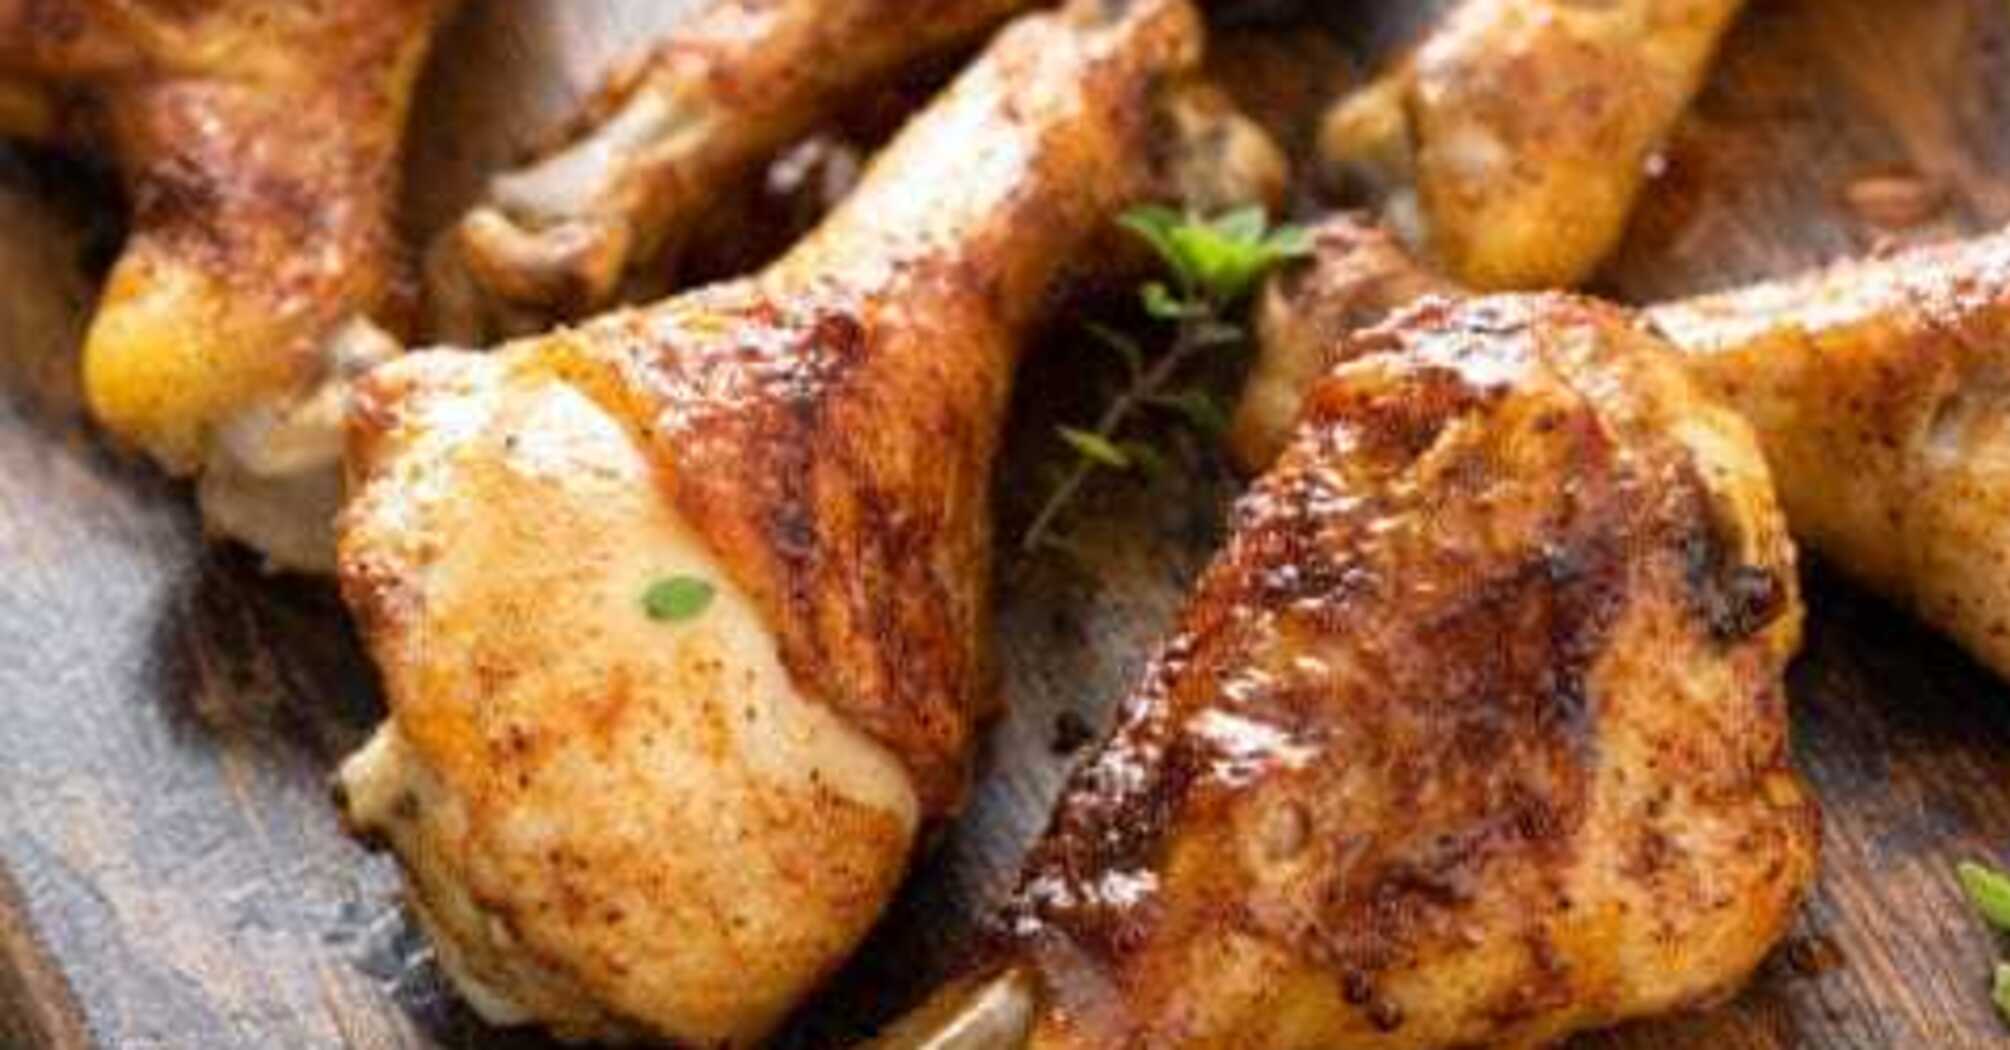 Soft inside and crispy outside: what to bake the perfect chicken drumsticks with